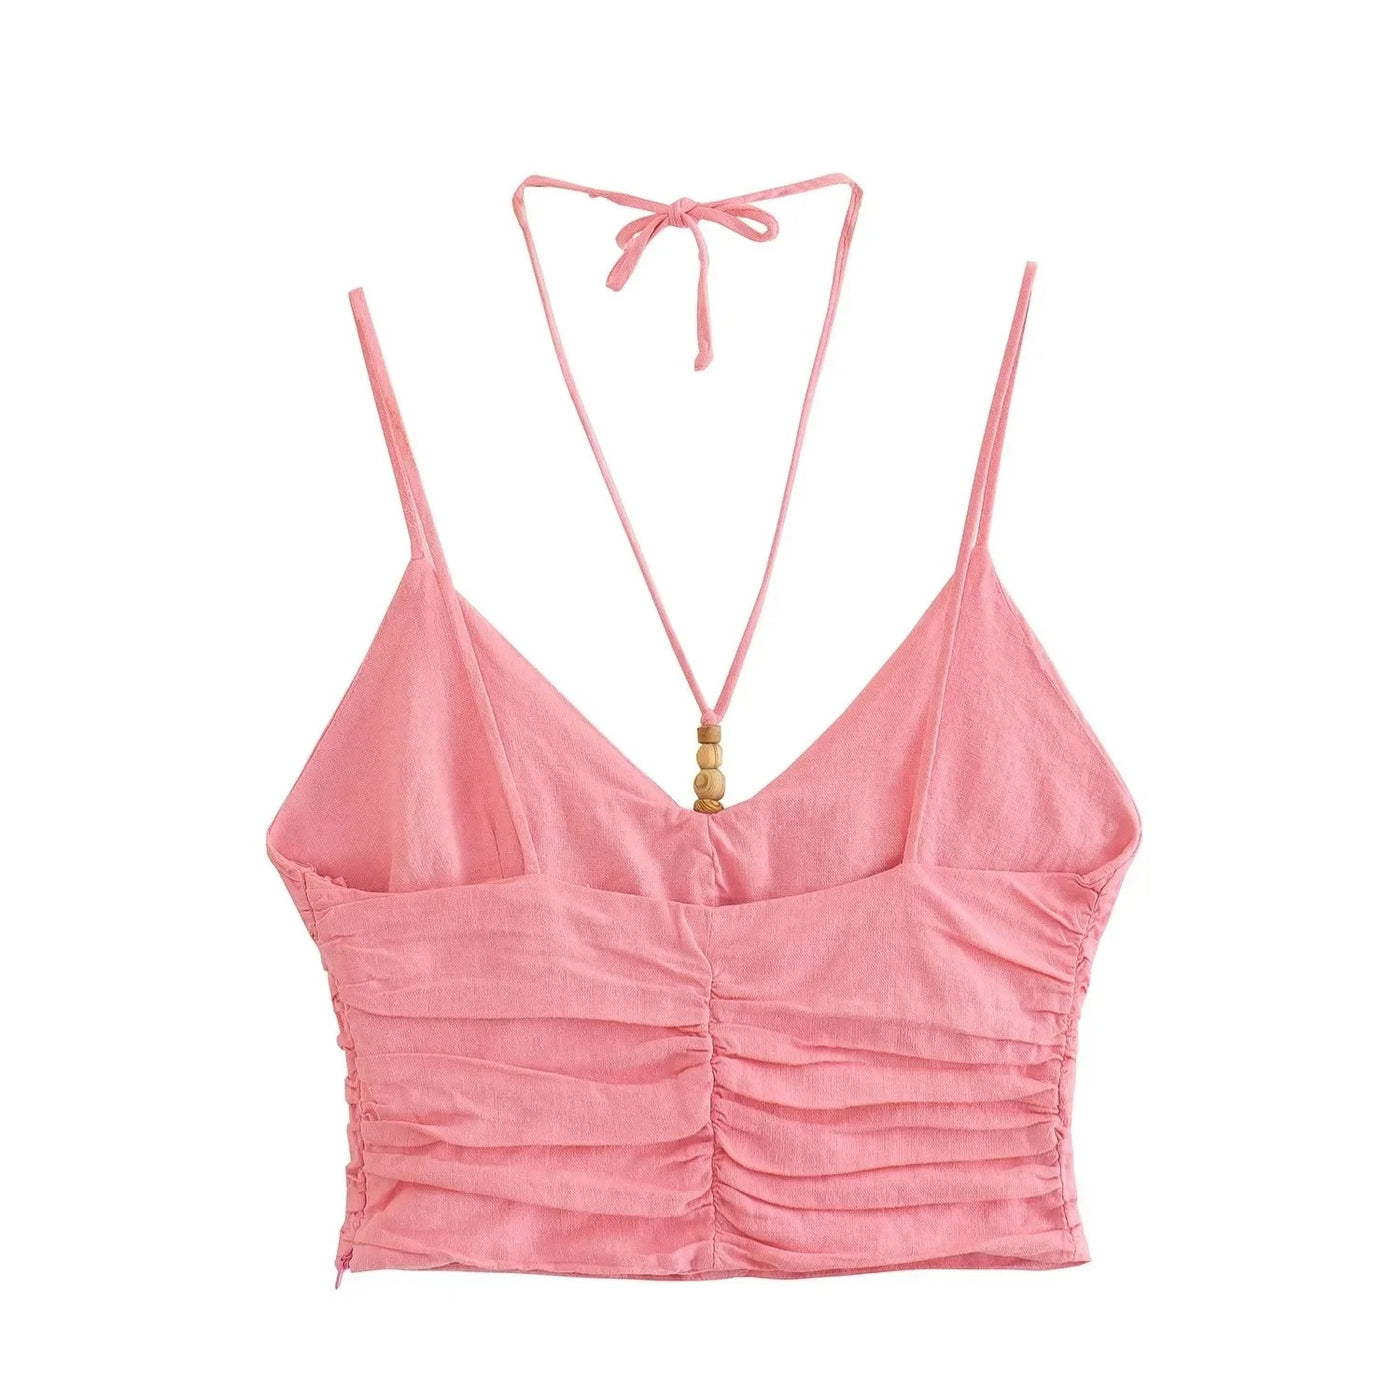 Leading the Trends Pink Ruched Crop Top and Skirt Set